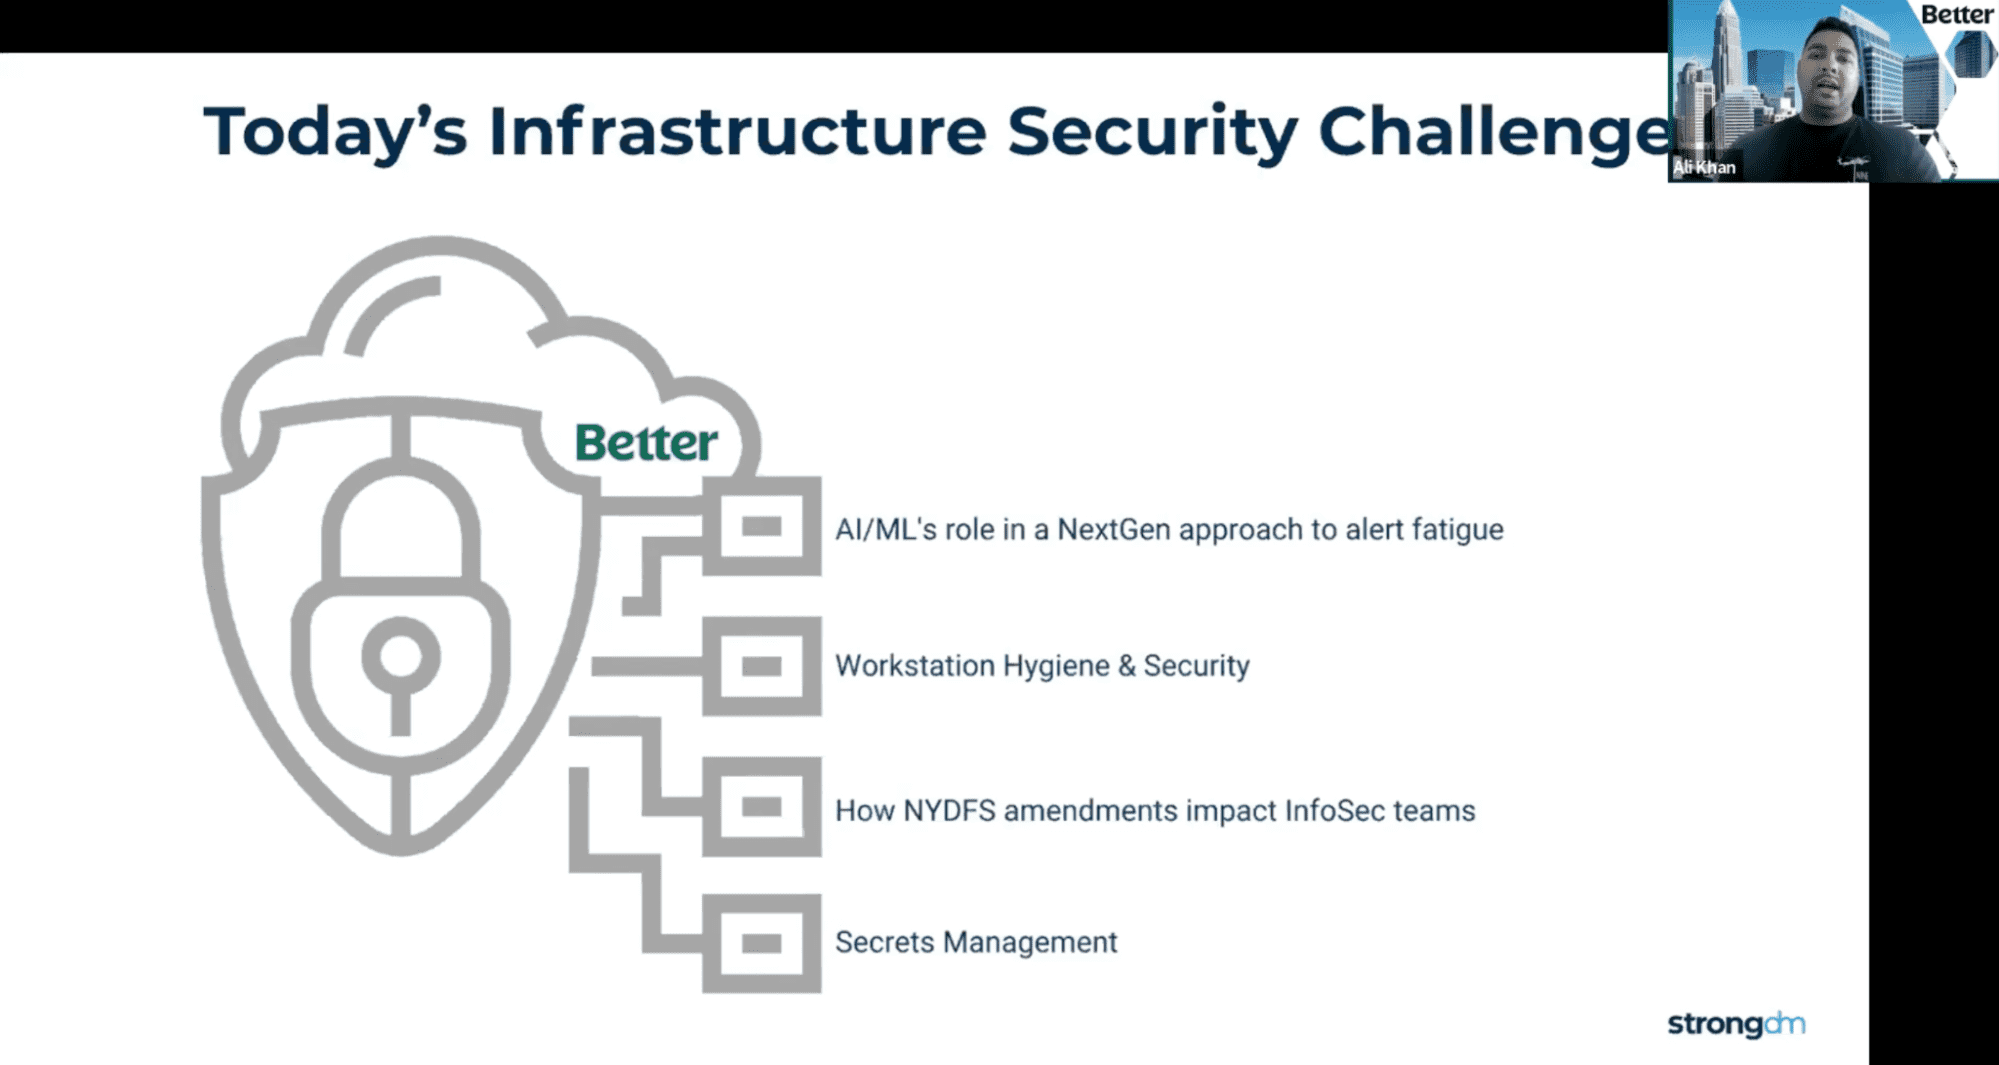 Better is tackling modern infrastructure security challenges.